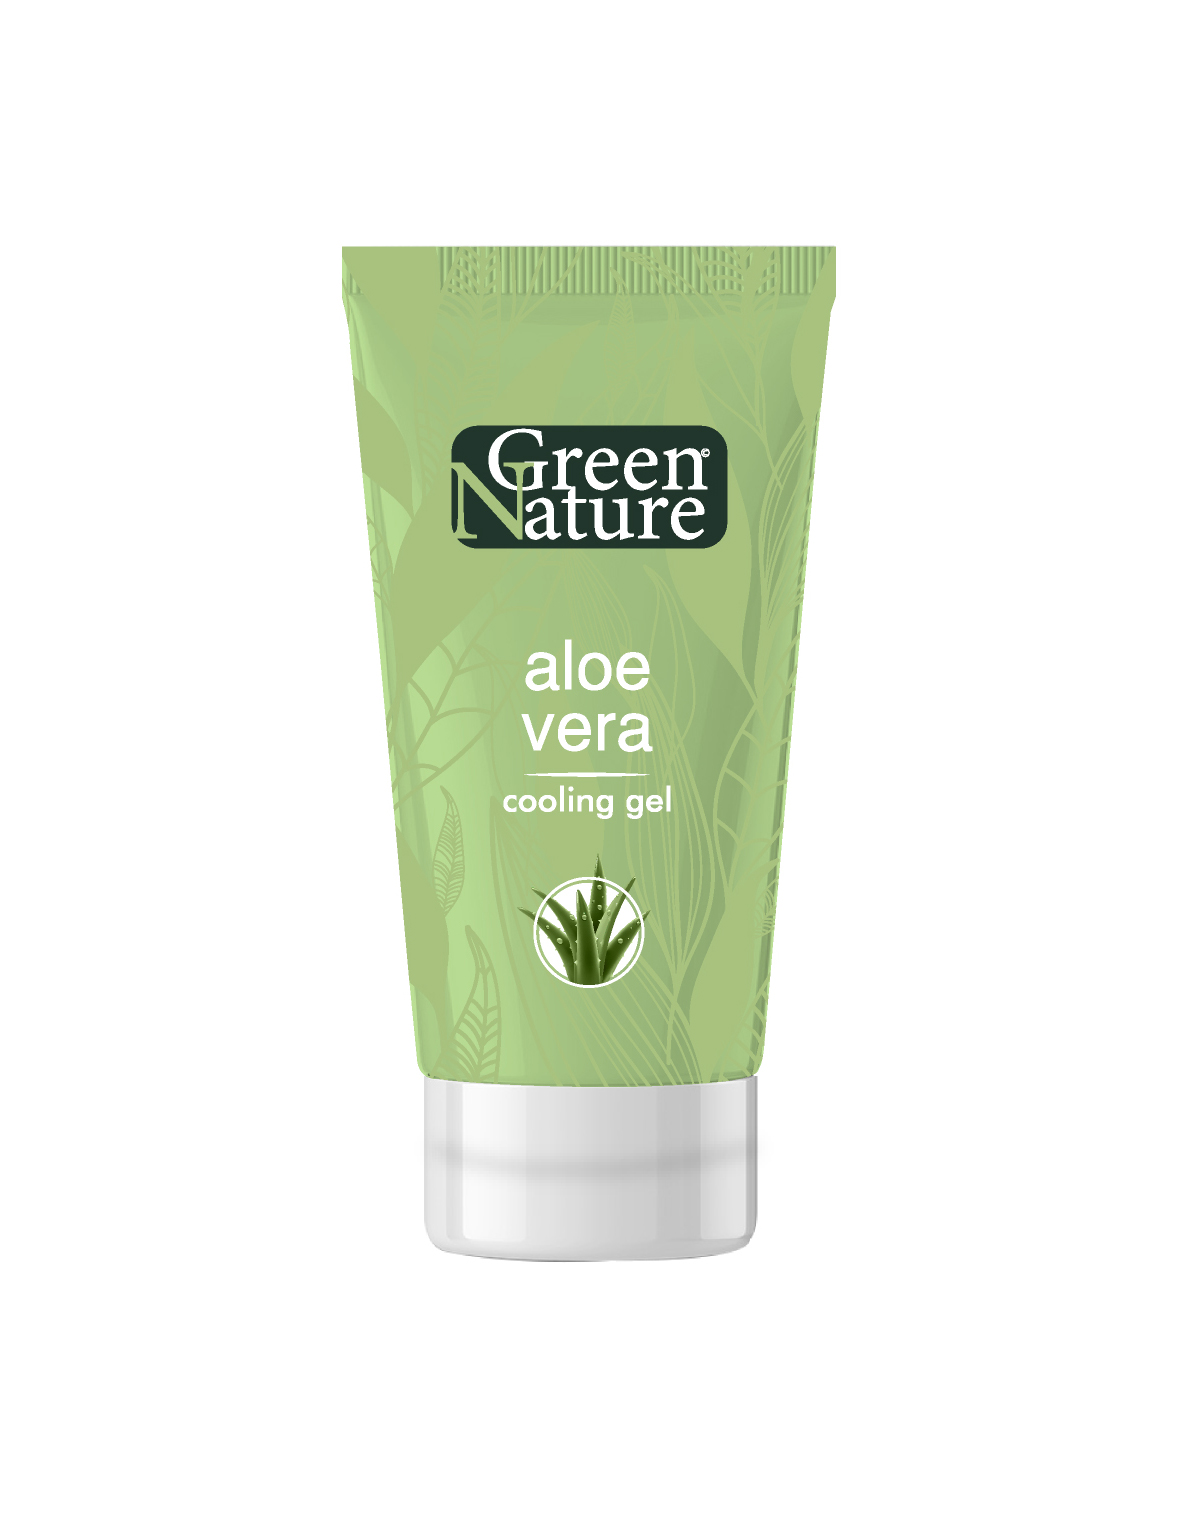 Featured image for “Green Nature Cooling Gel”